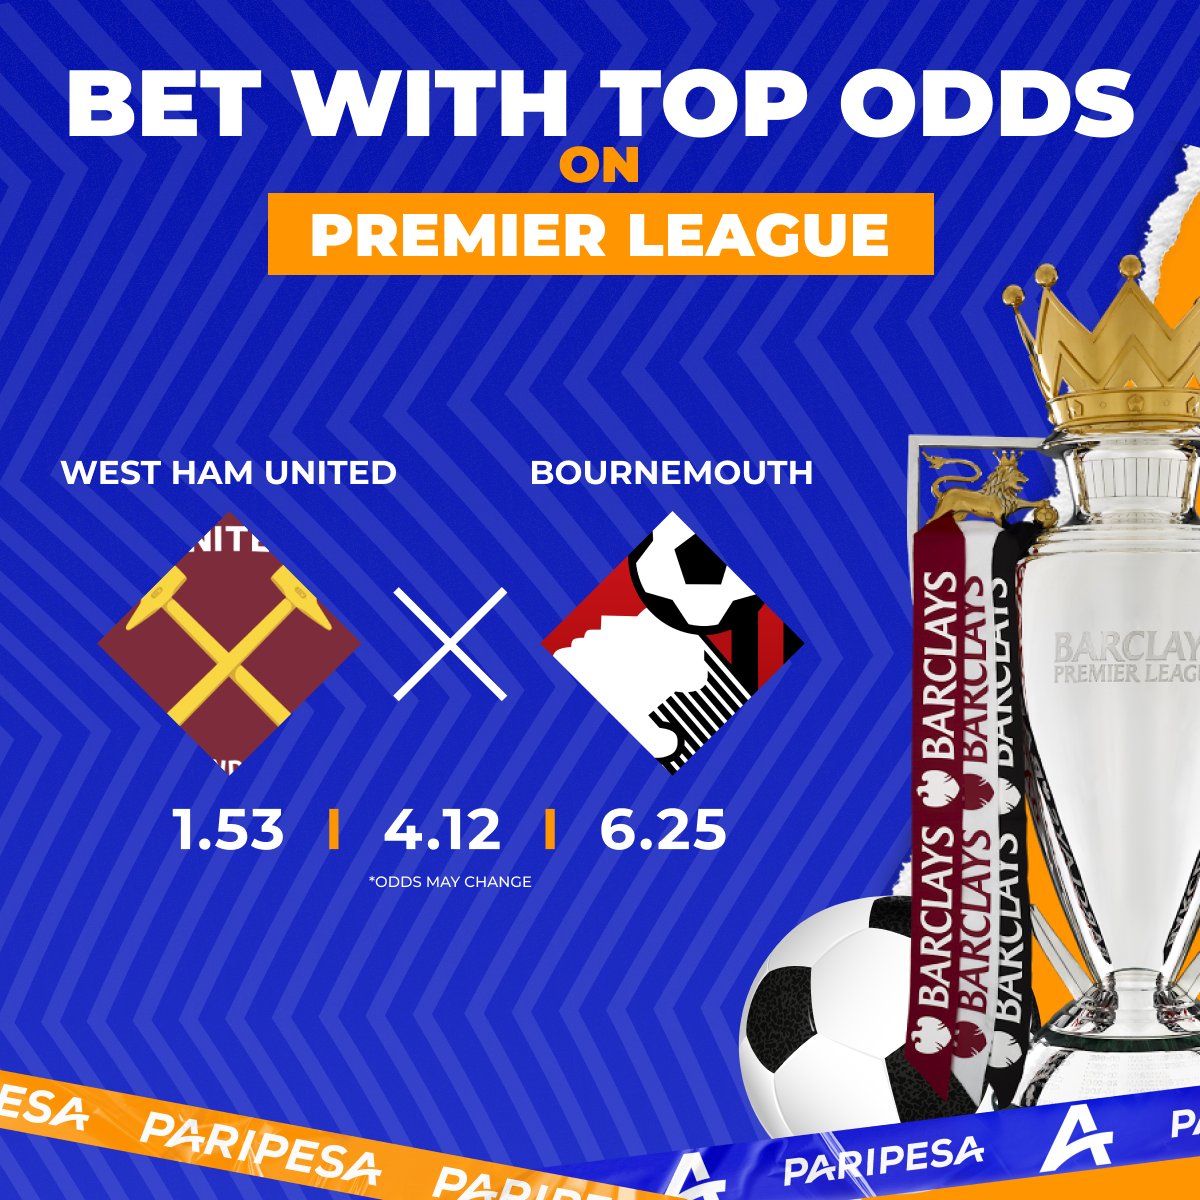 ⚽👎 It’s not a secret, that West Ham has problems with scoring this season. 🥅 On the other hand, Bournemouth concede too much... 🧐 Will it be full defensive game, or West Ham will rush for points? 🎯 Bet on any outcome with PariPesa! m.paripesa.bet/xr9c #PremierLeague